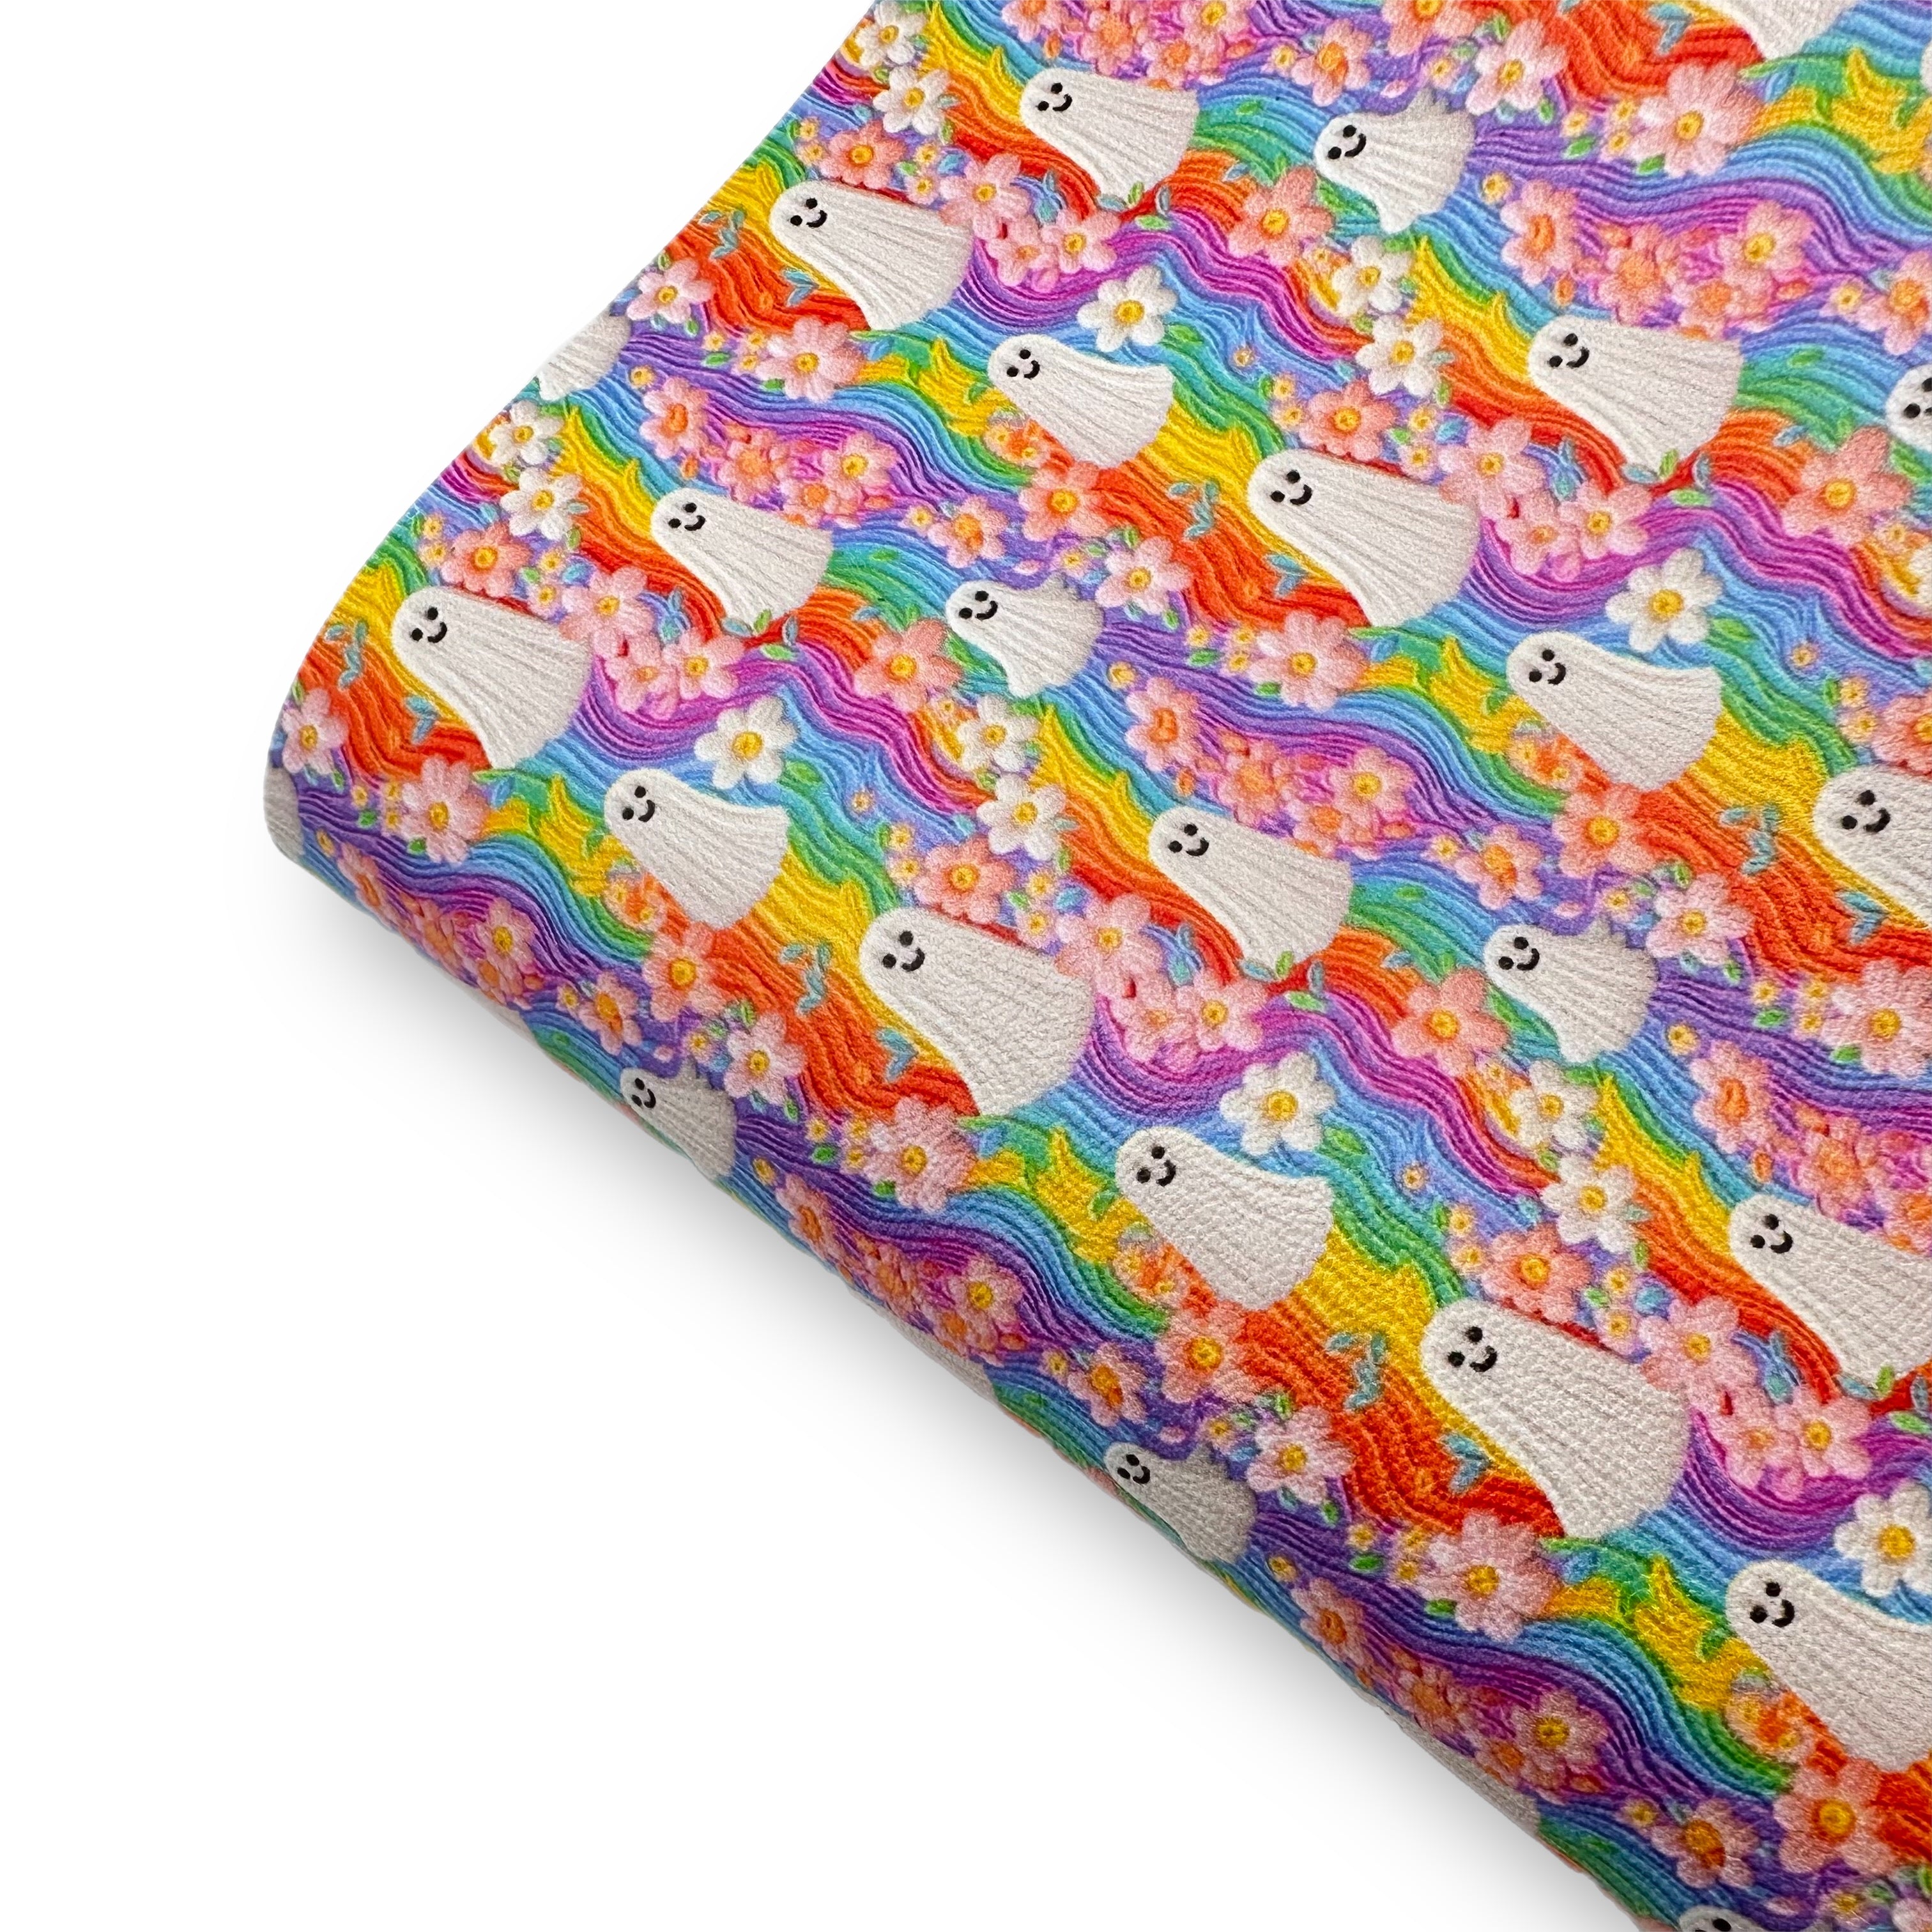 Embroidered Rain-boo ghosties  Premium Faux Leather Fabric Sheets